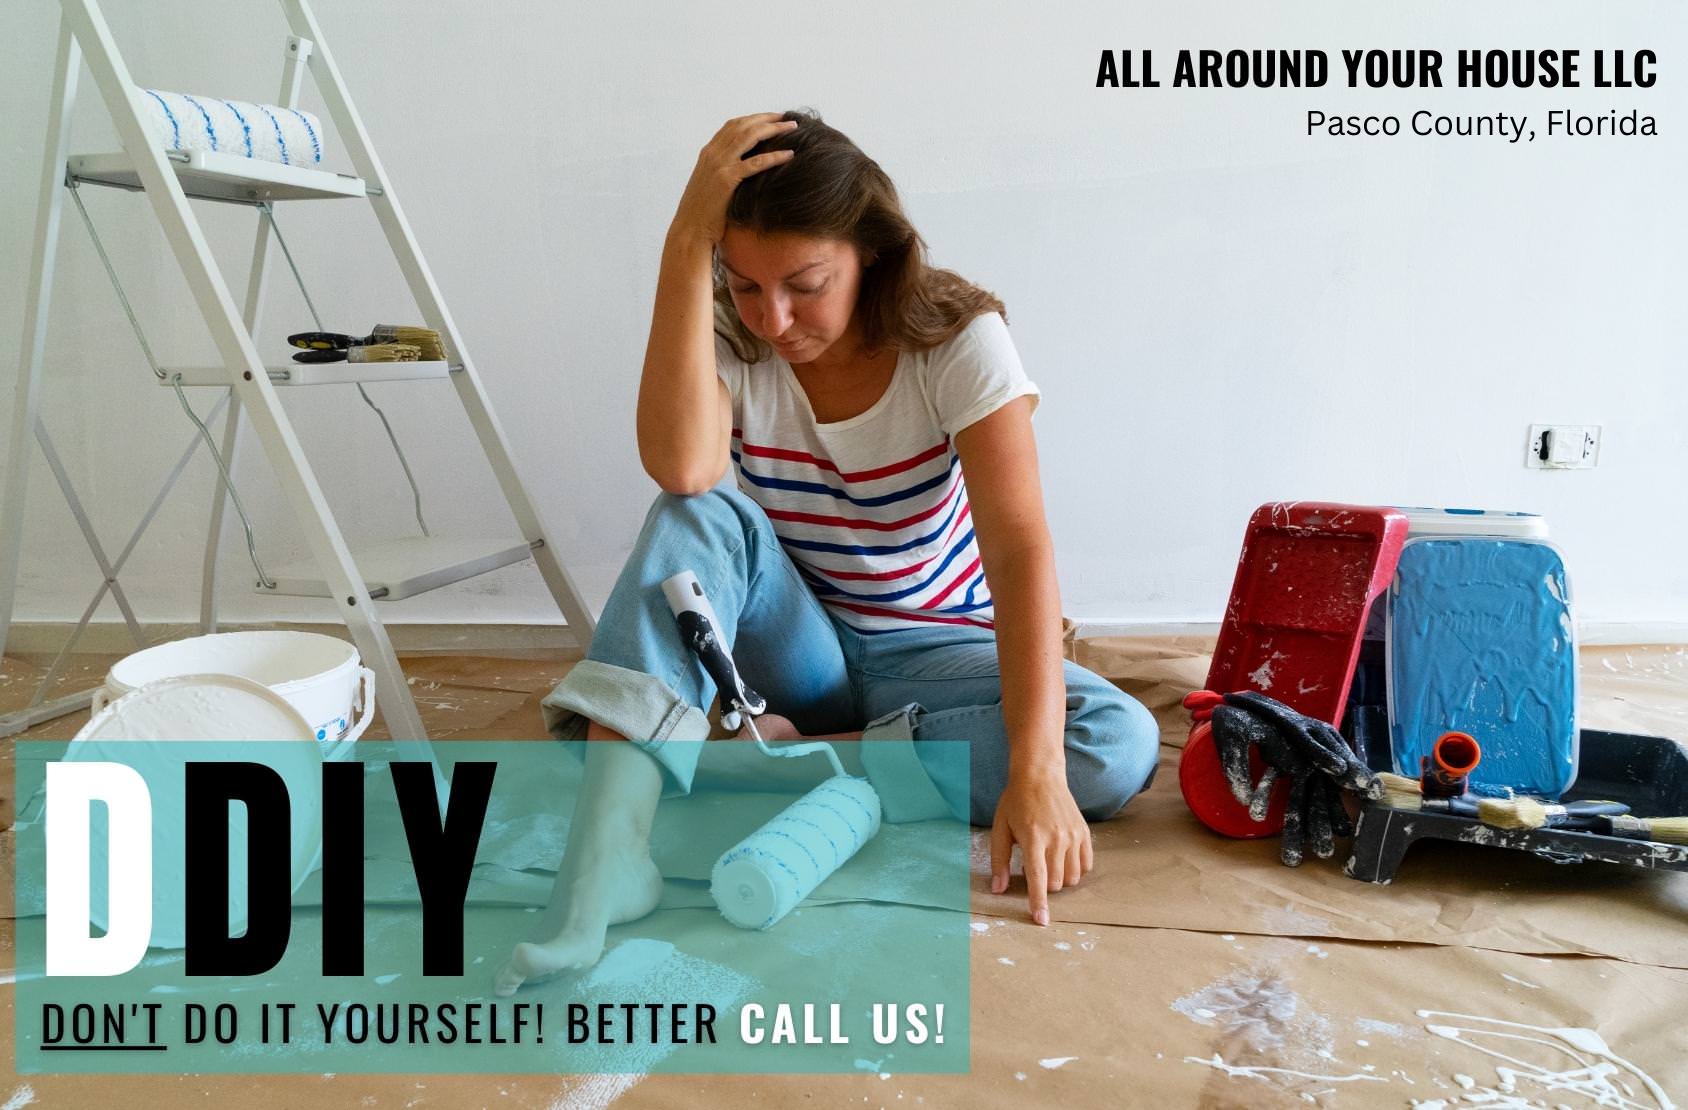 Best Handyman Service and Cleaning Company in Pasco County Florida - All Around Your House LLC